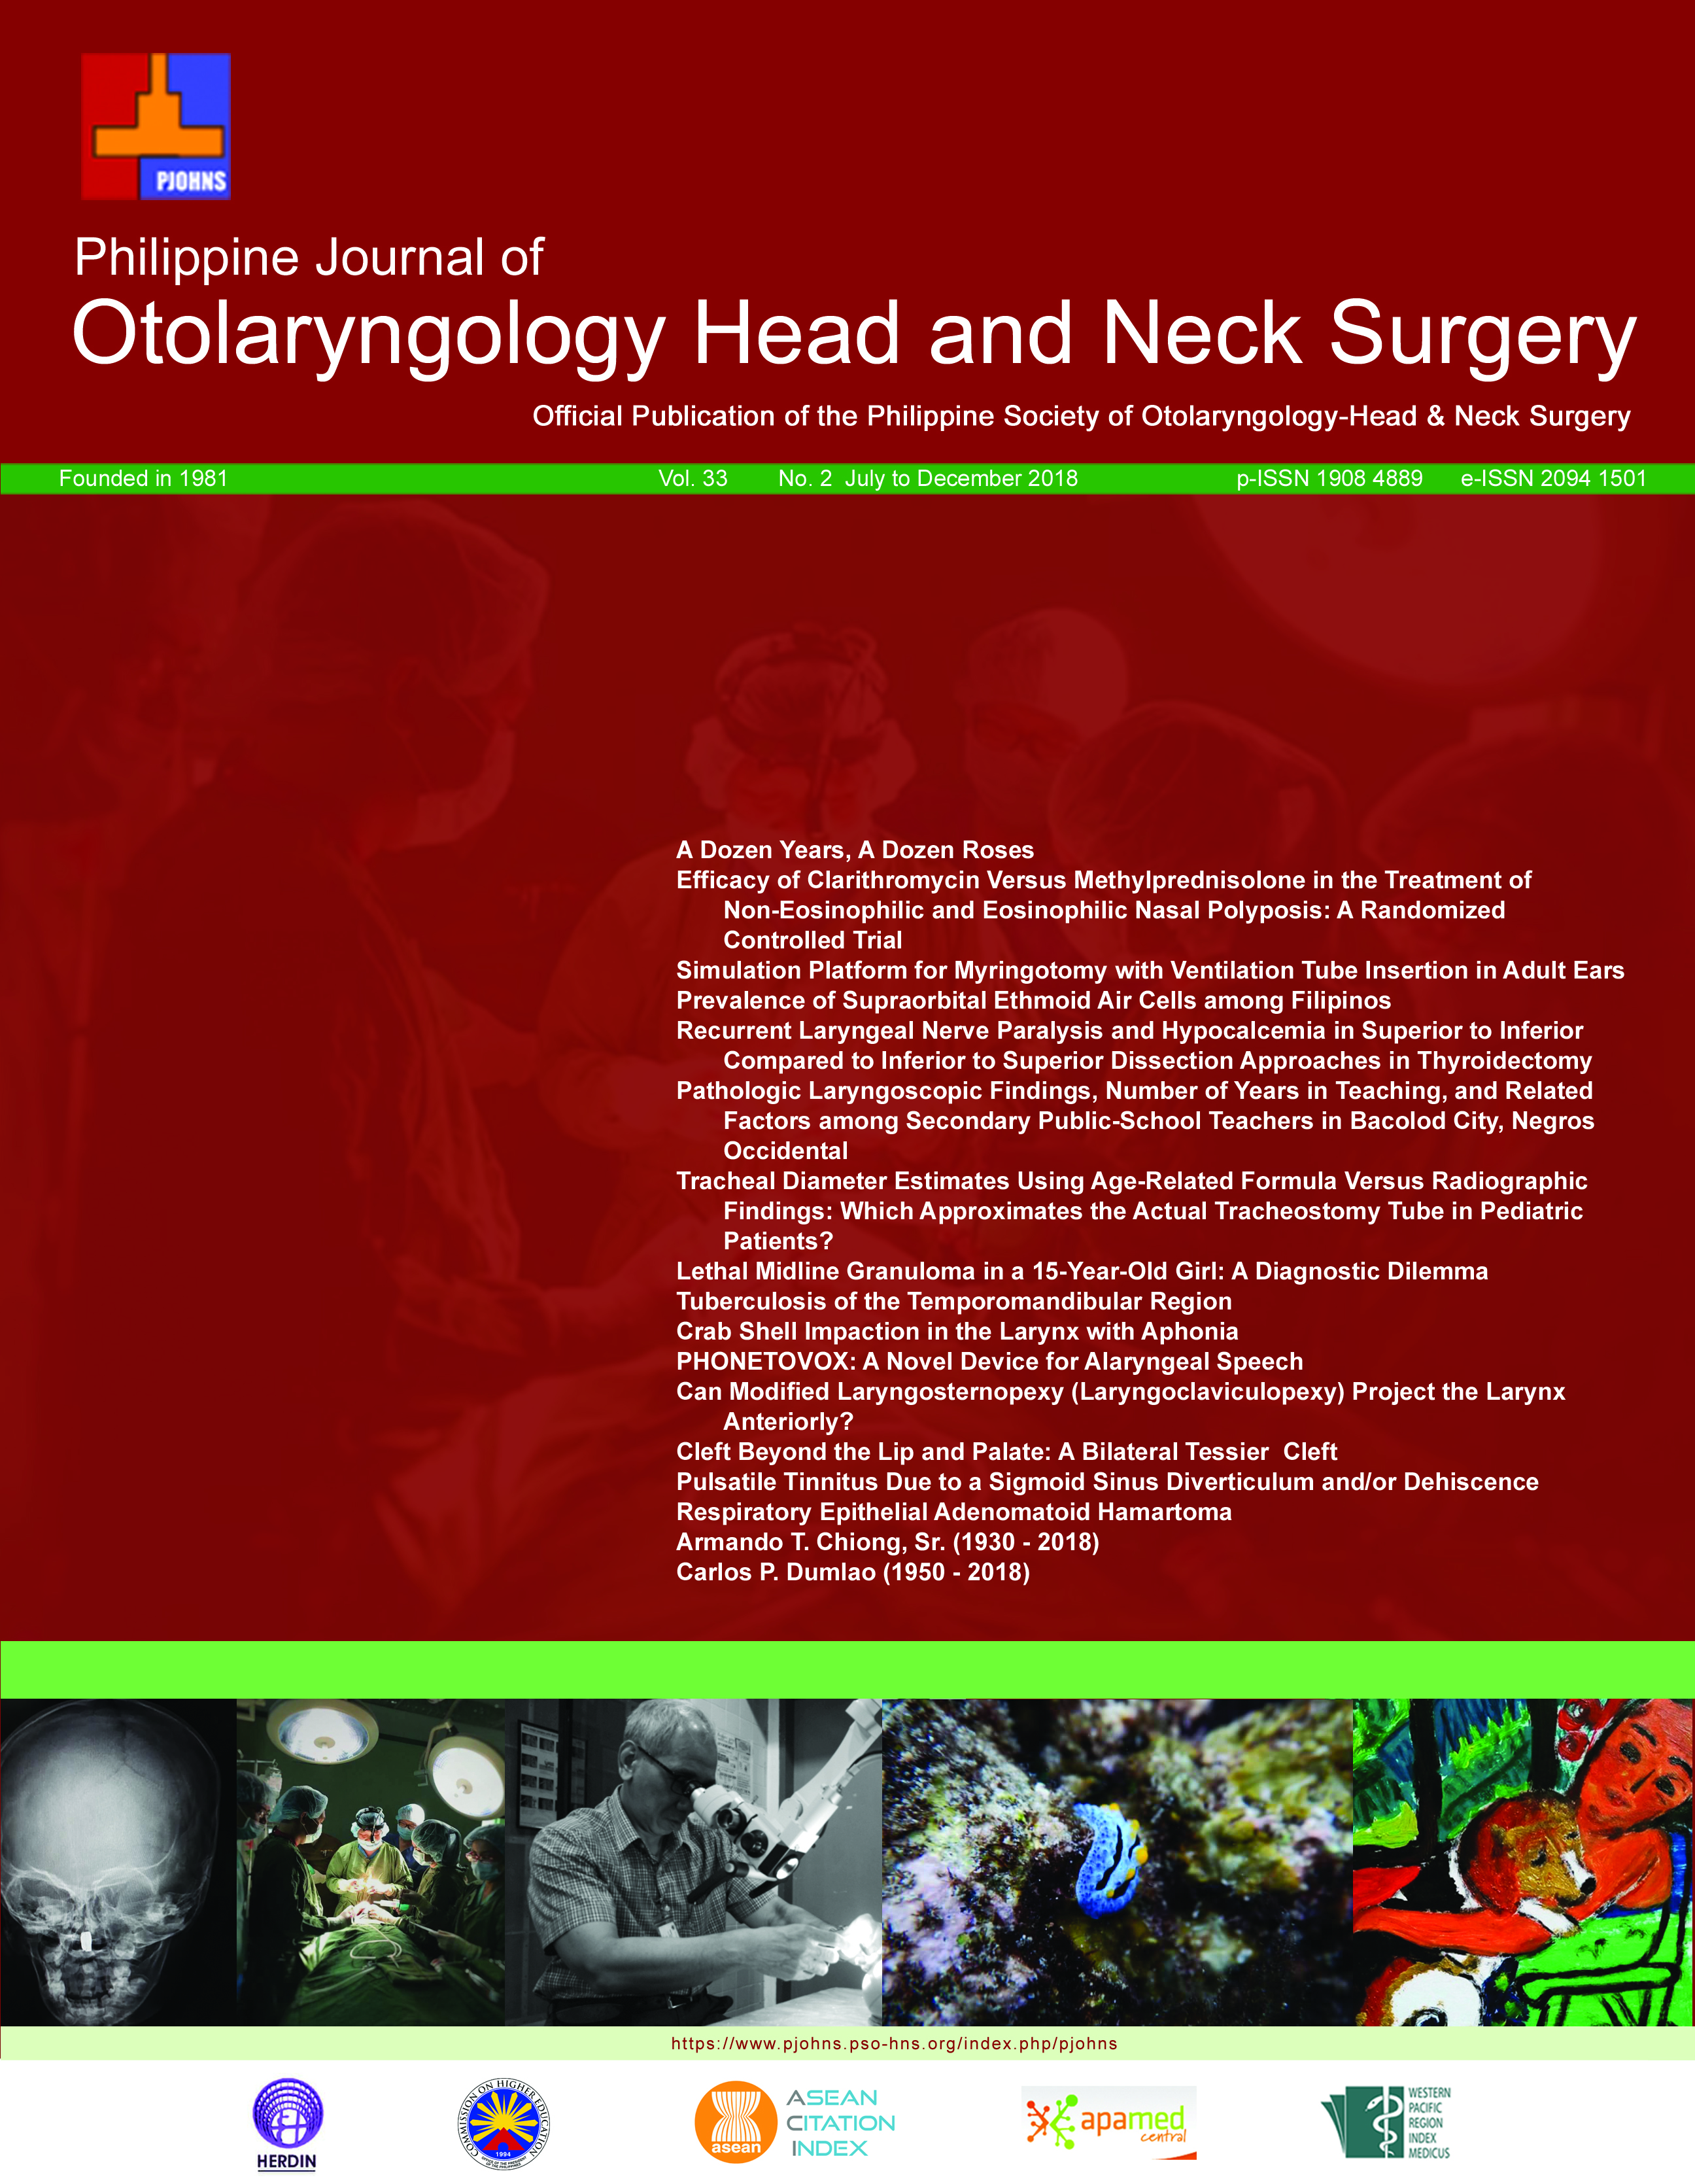 					View Vol. 33 No. 2 (2018): Philippine Journal of Otolaryngology-Head and Neck Surgery
				